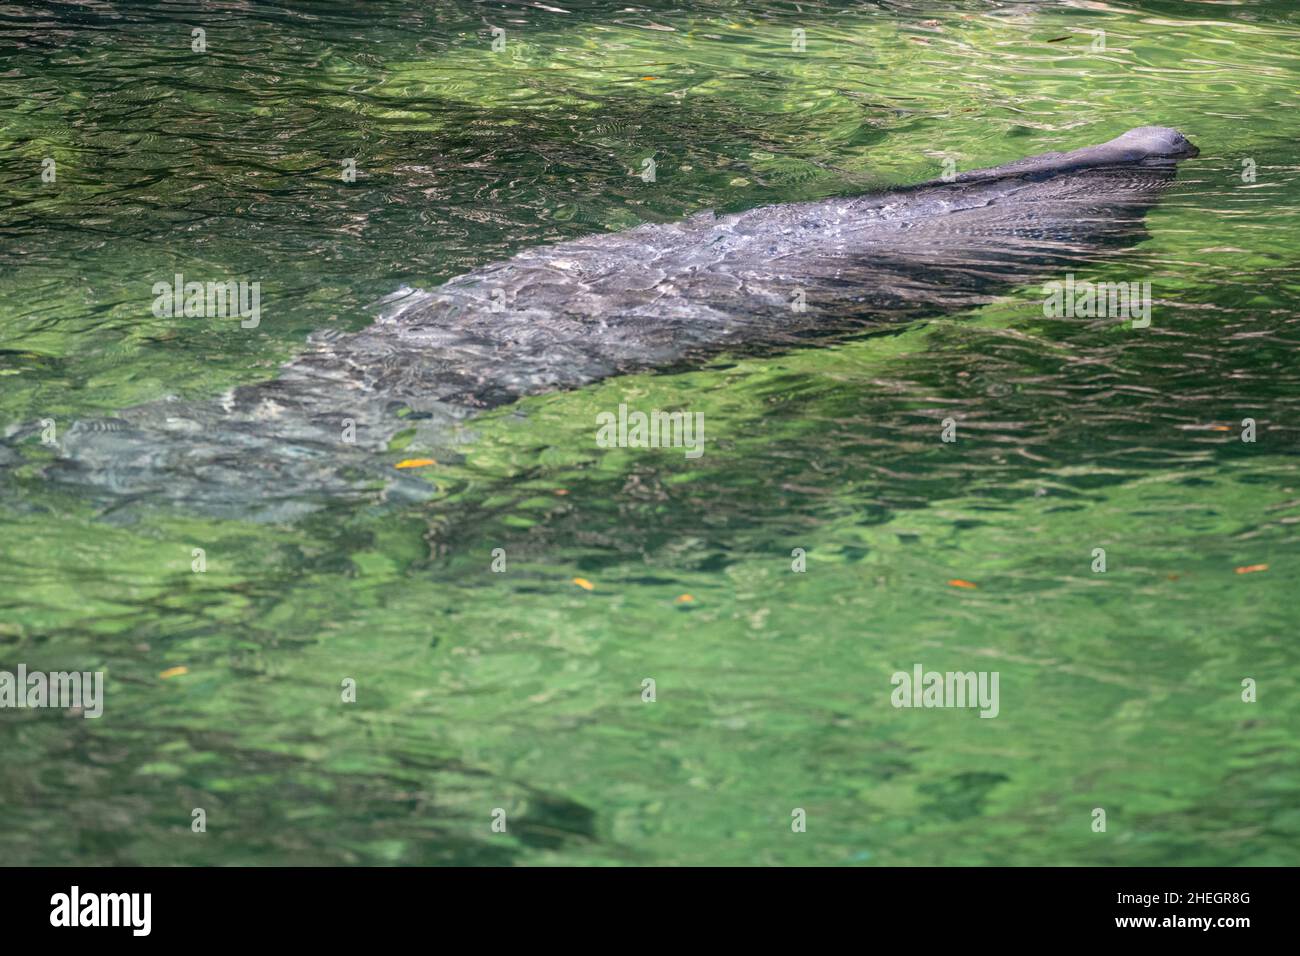 Surfacing West Indian manatee (Trichechus manatus) in Blue Spring Run at Blue Spring State Park in Volusia County, Florida. (USA) Stock Photo